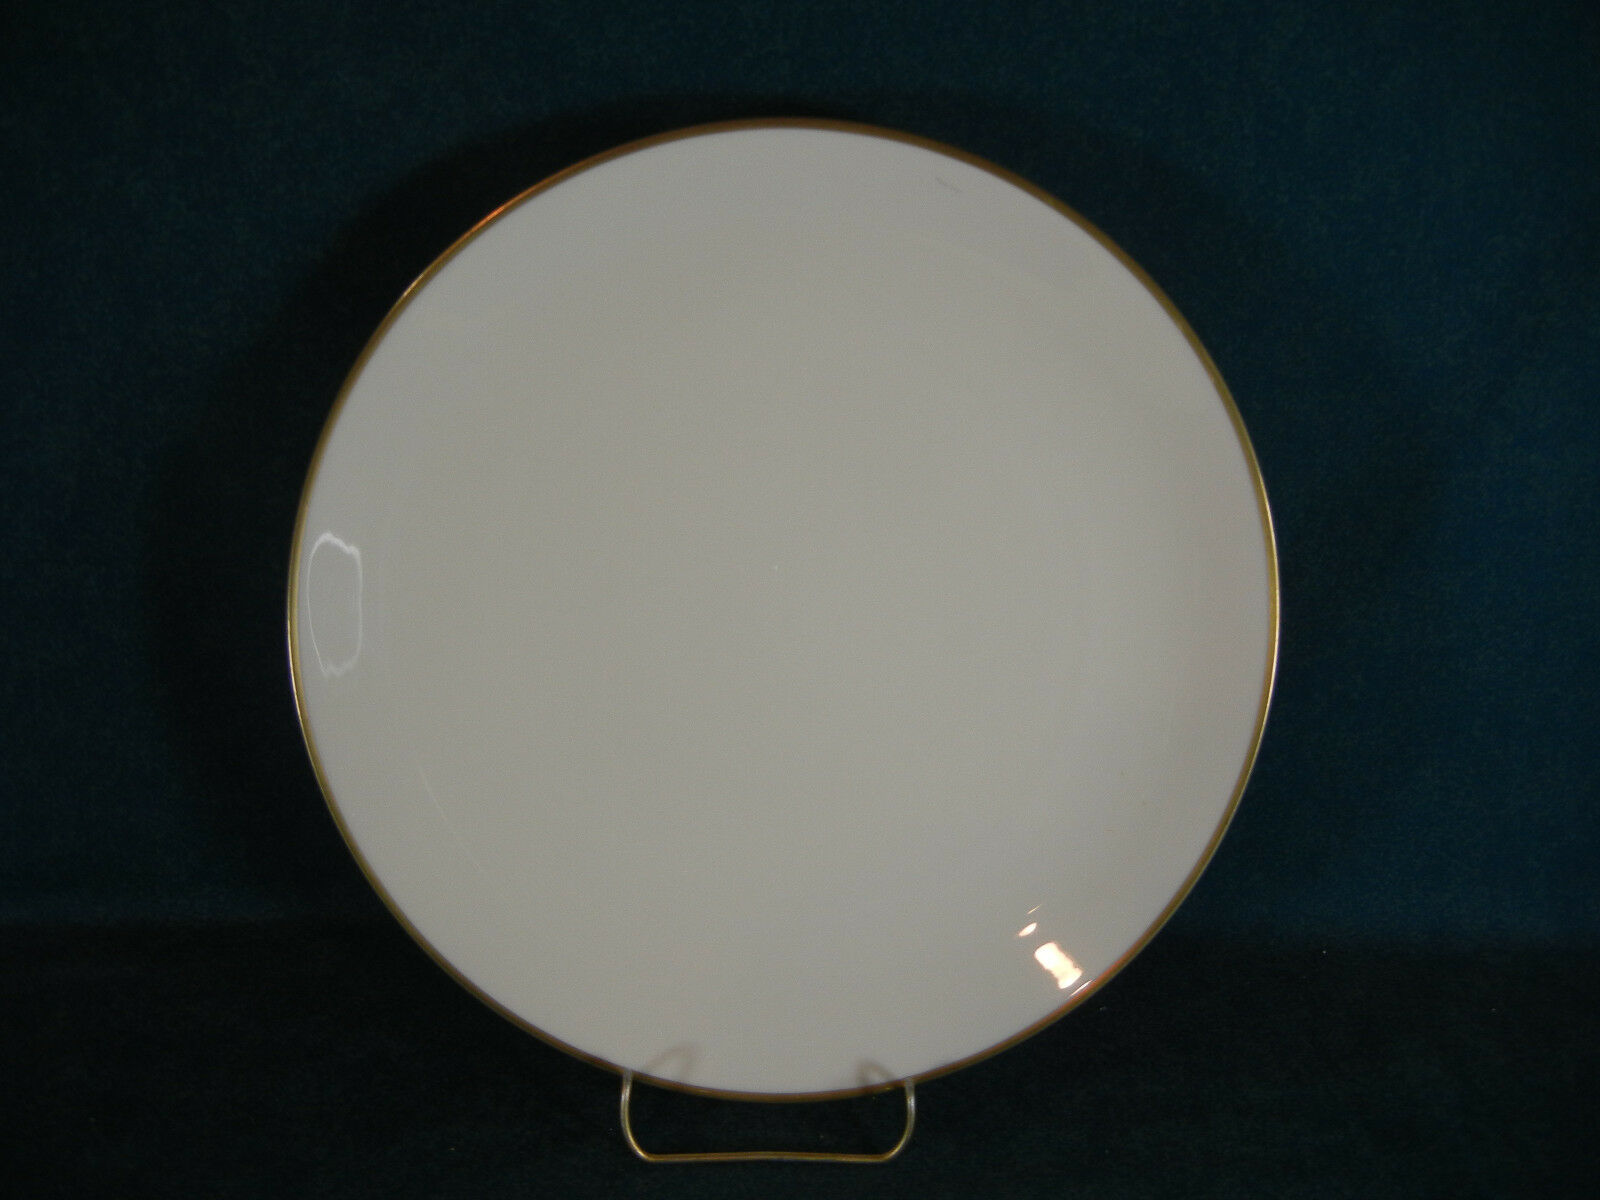 Gorham China Gold Coupe Salad Plate(s)